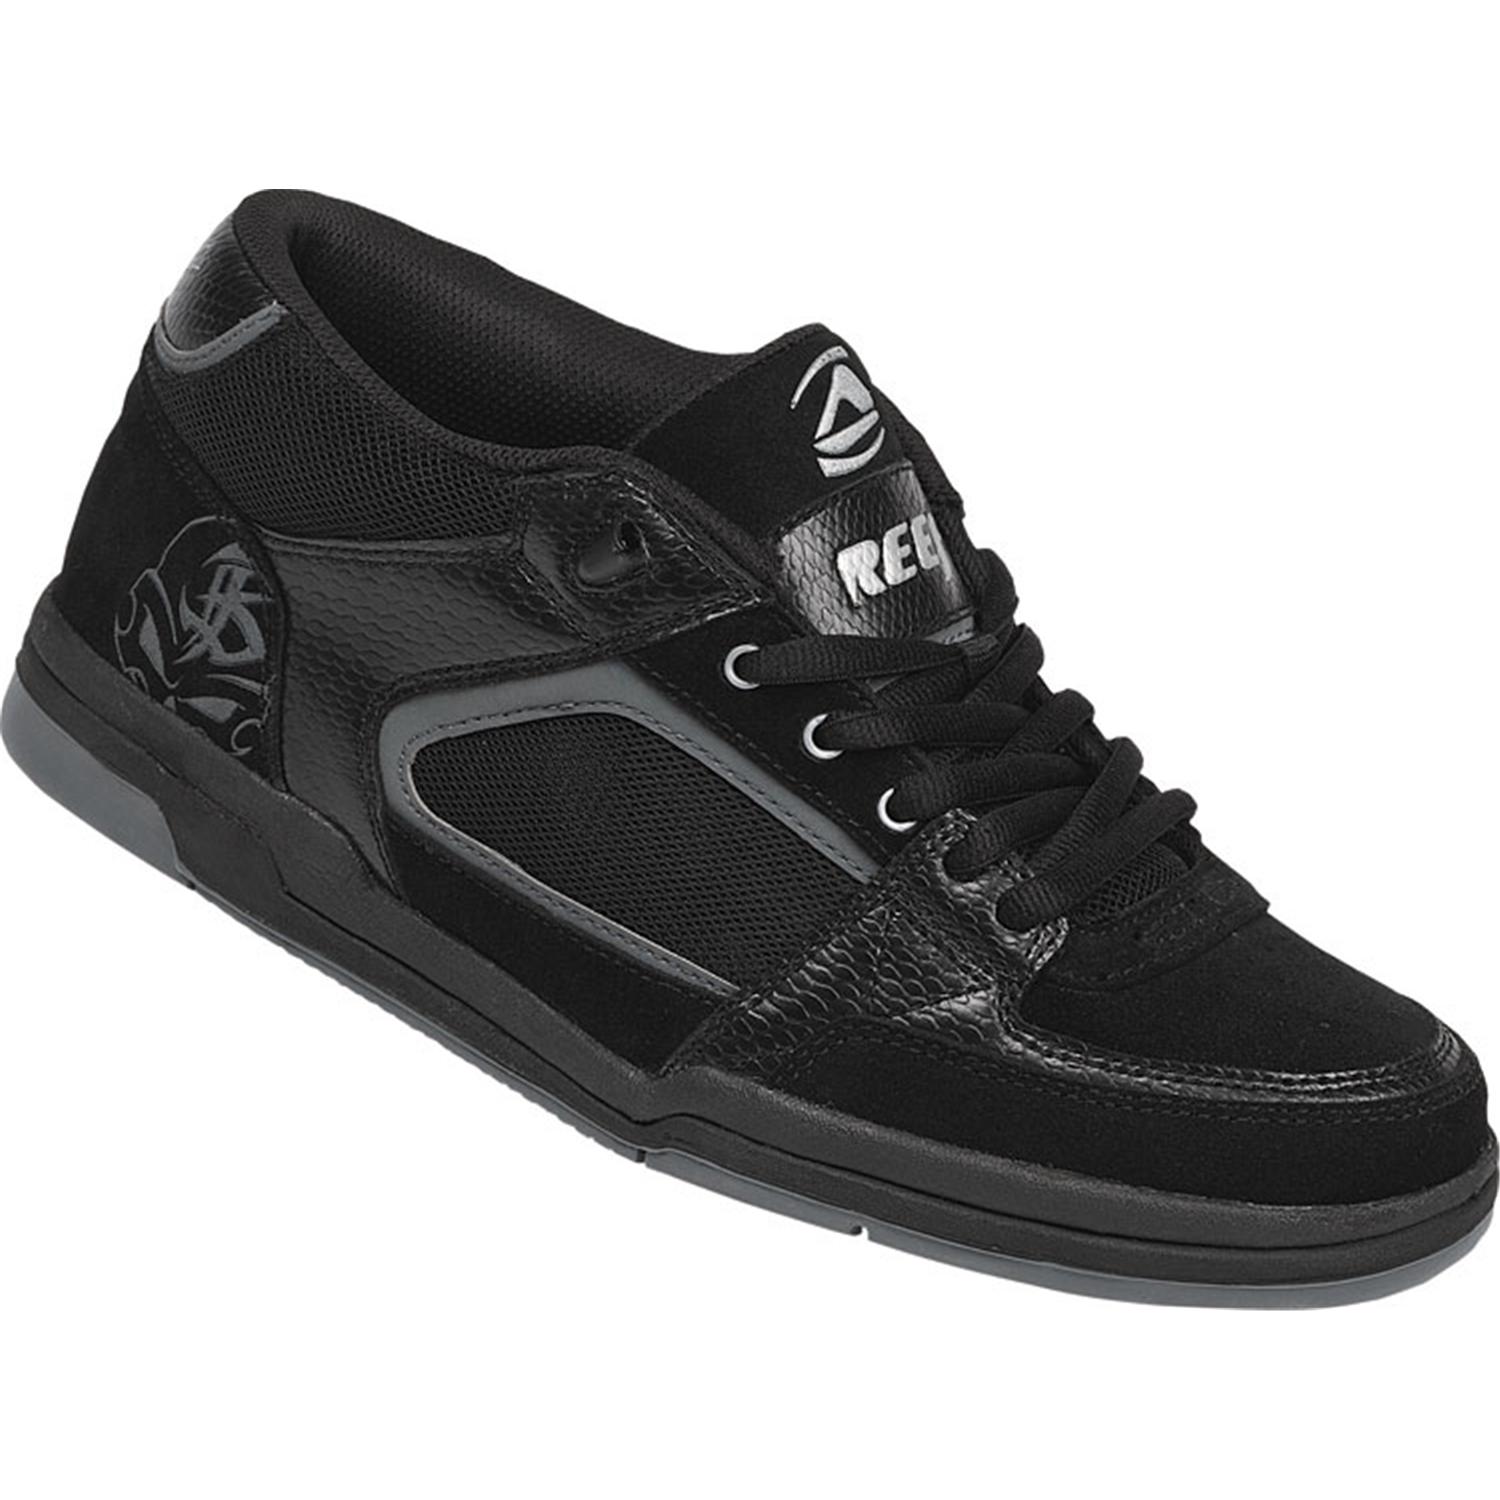 Reef Byerly III Wakeskate Shoes 2008 | evo outlet